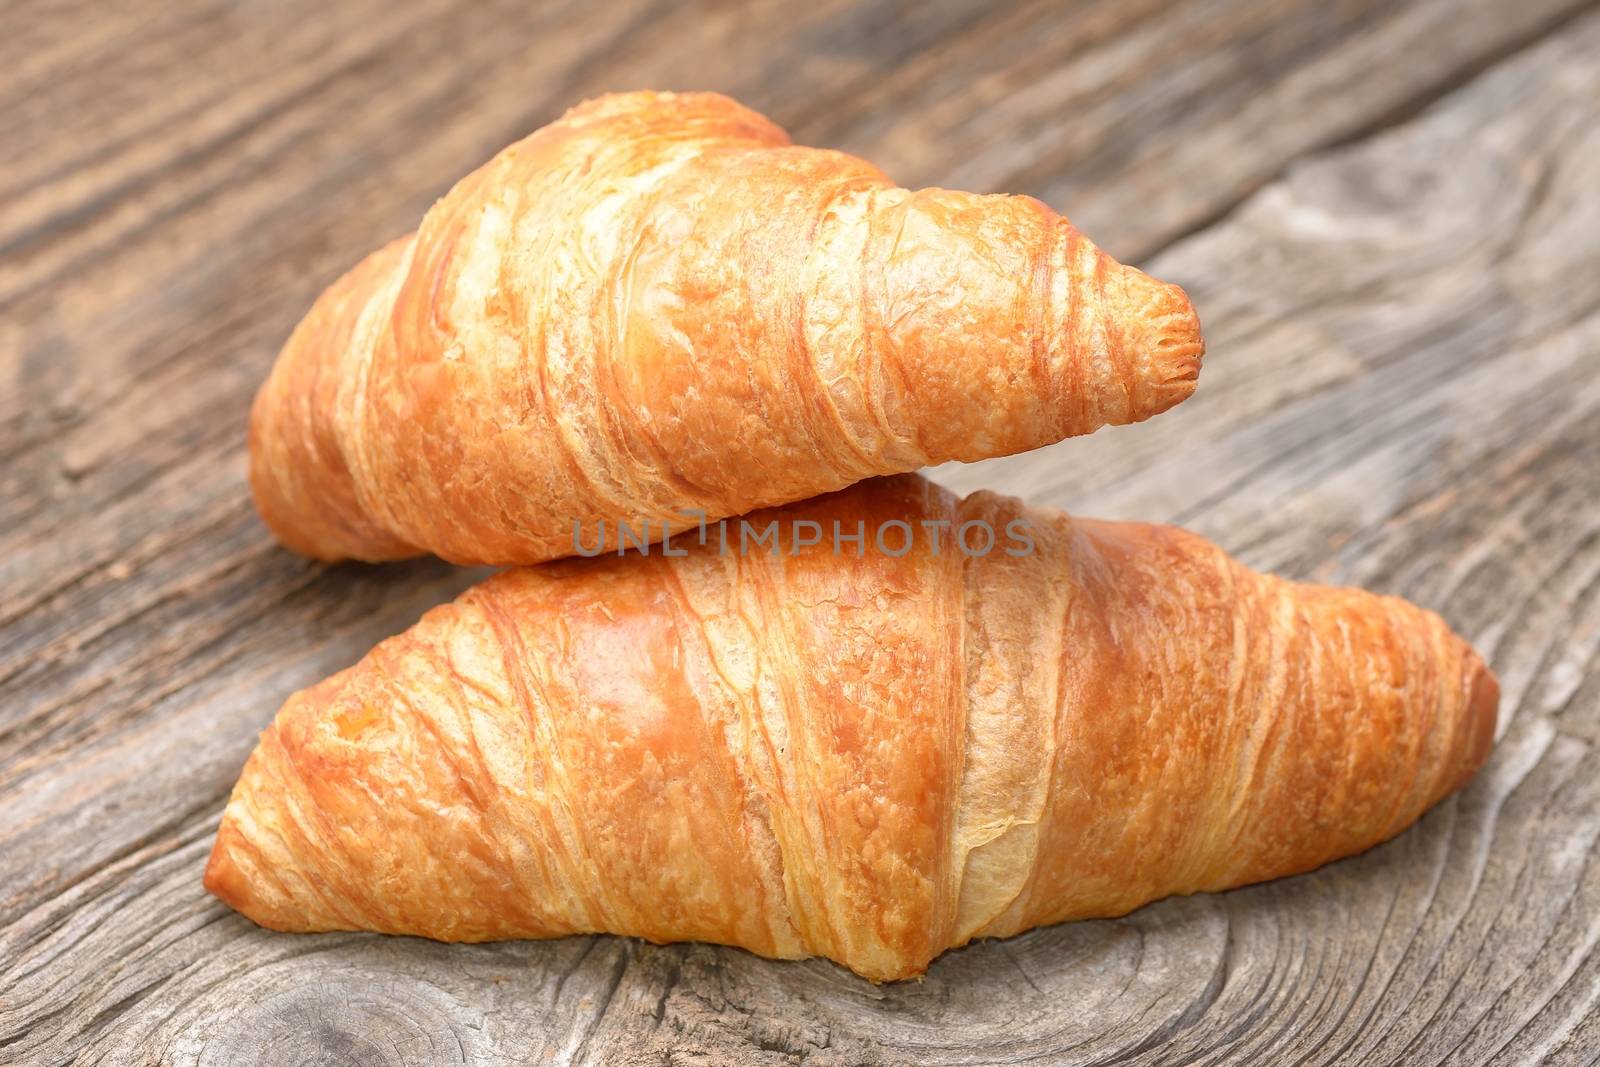 Croissants on the wooden table by comet